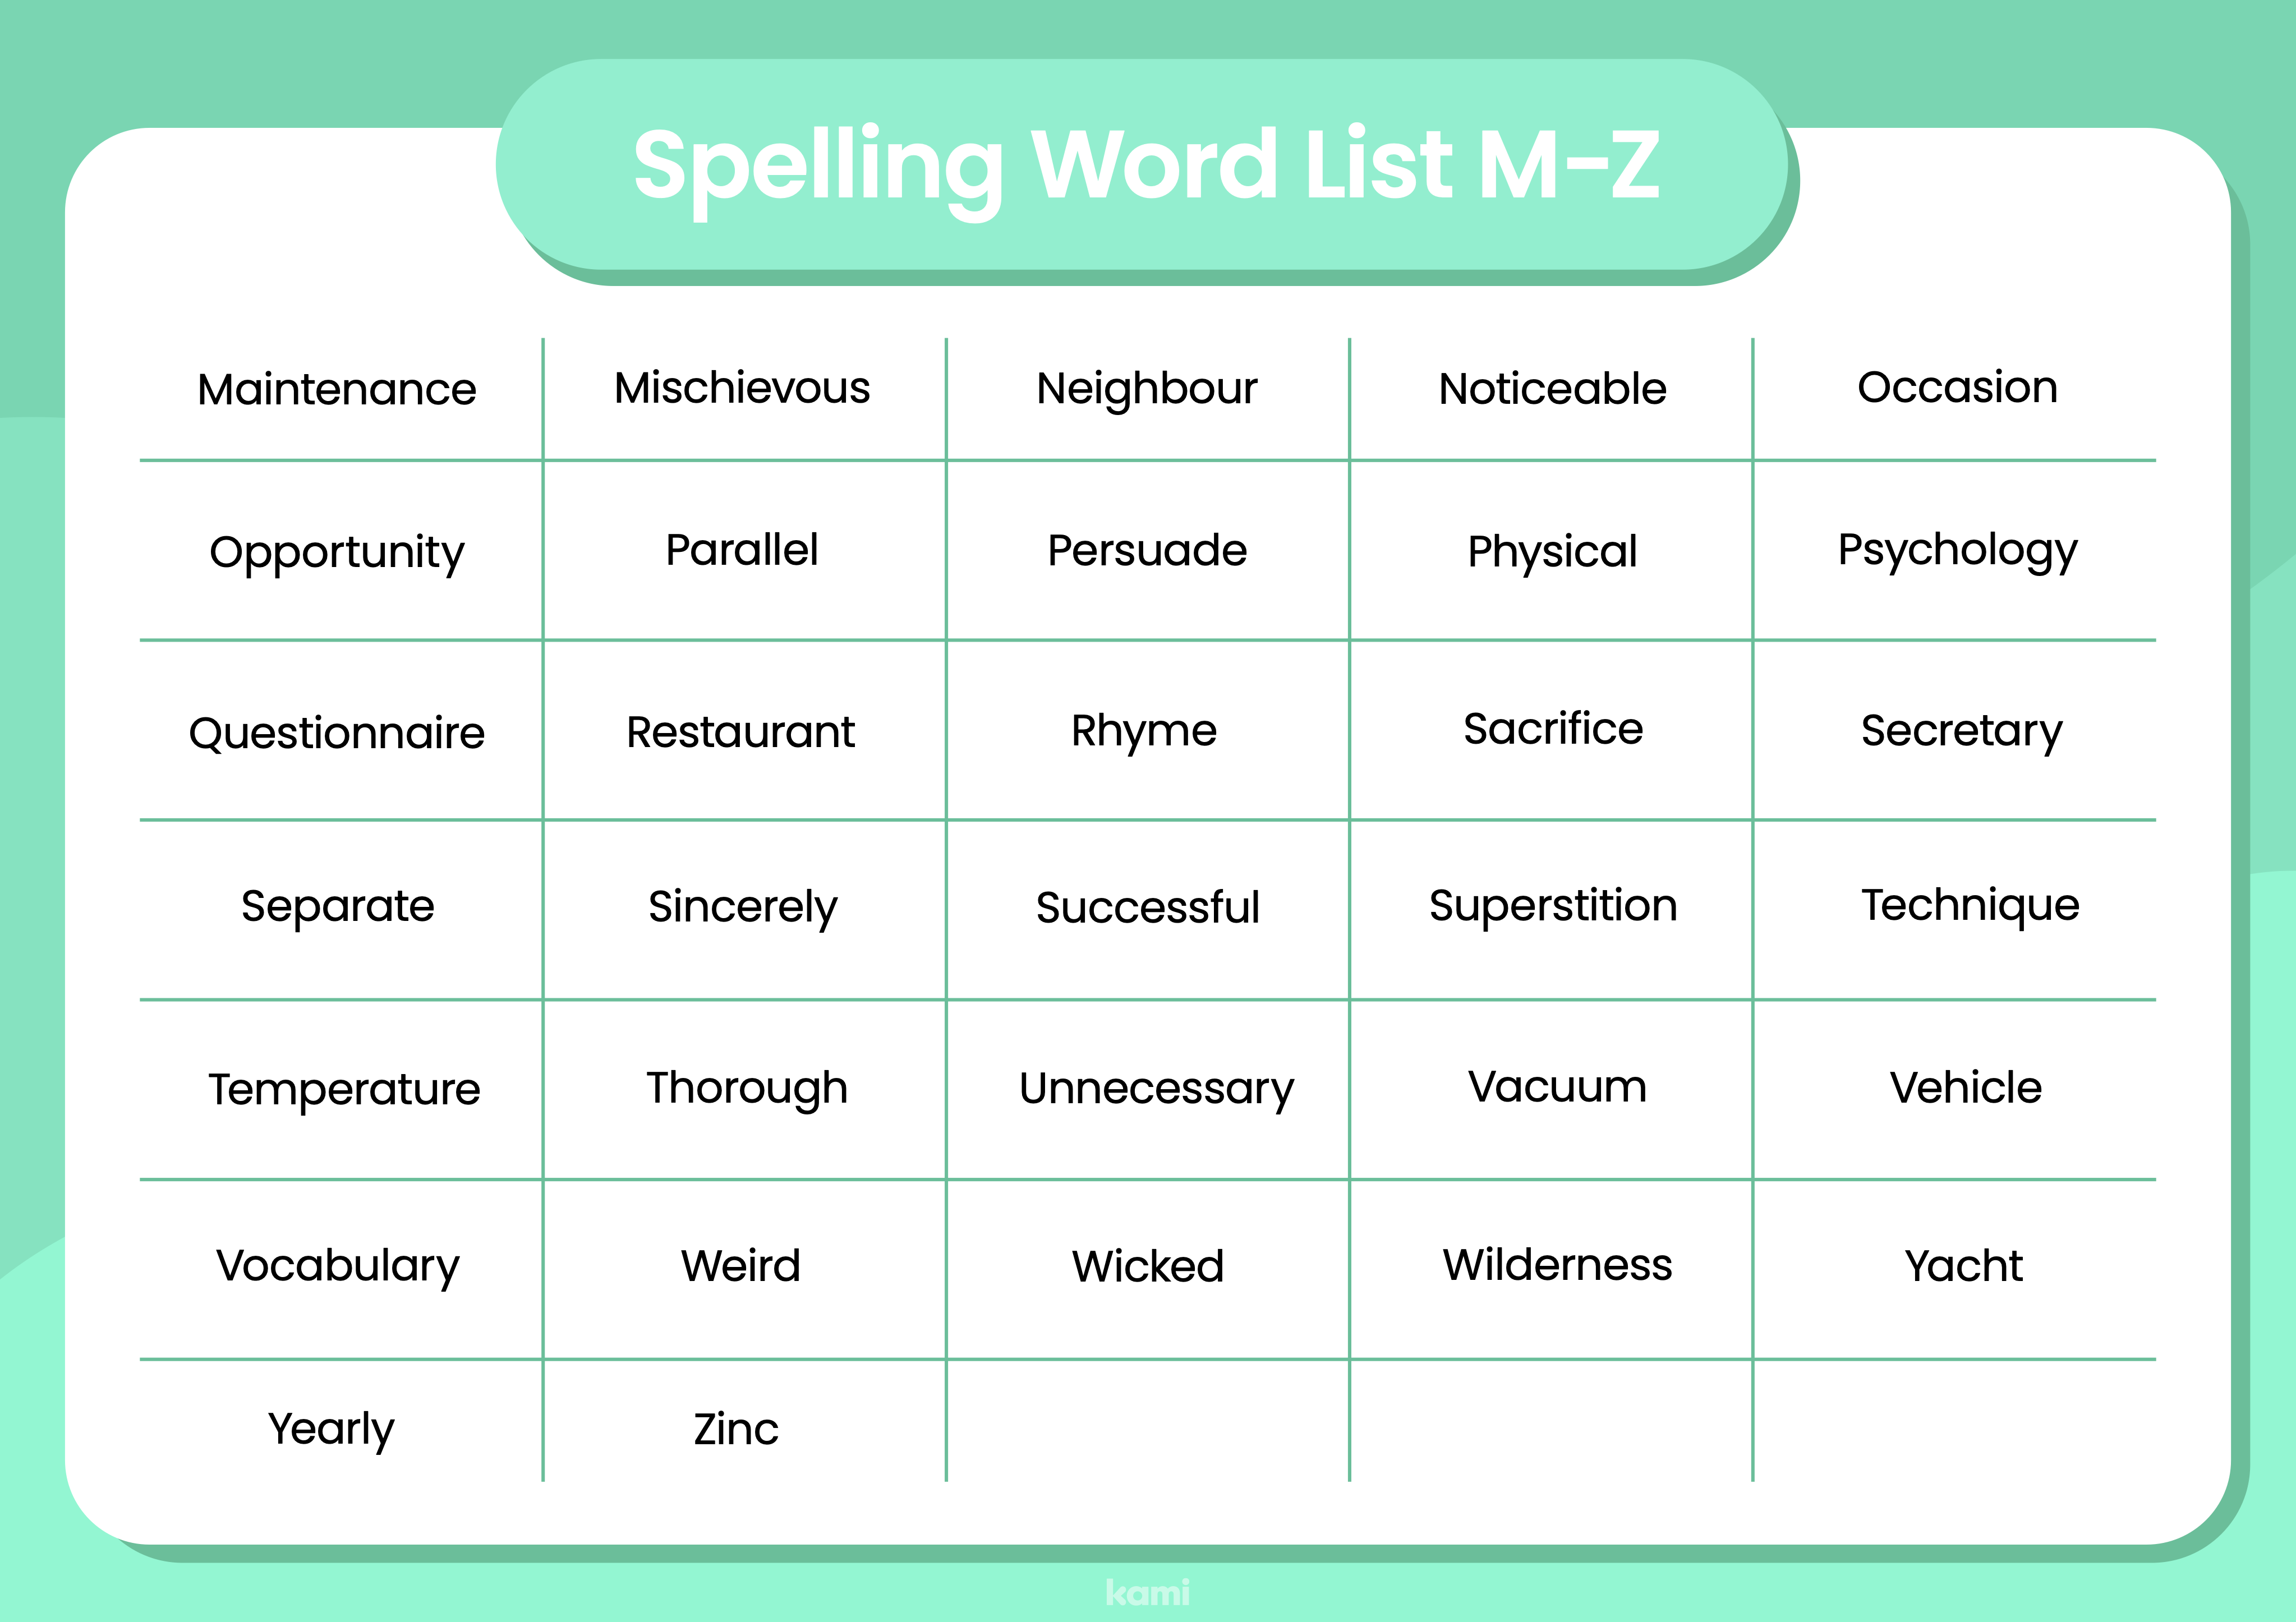 A spelling word list for year 5 and 6 students with a most common words design.